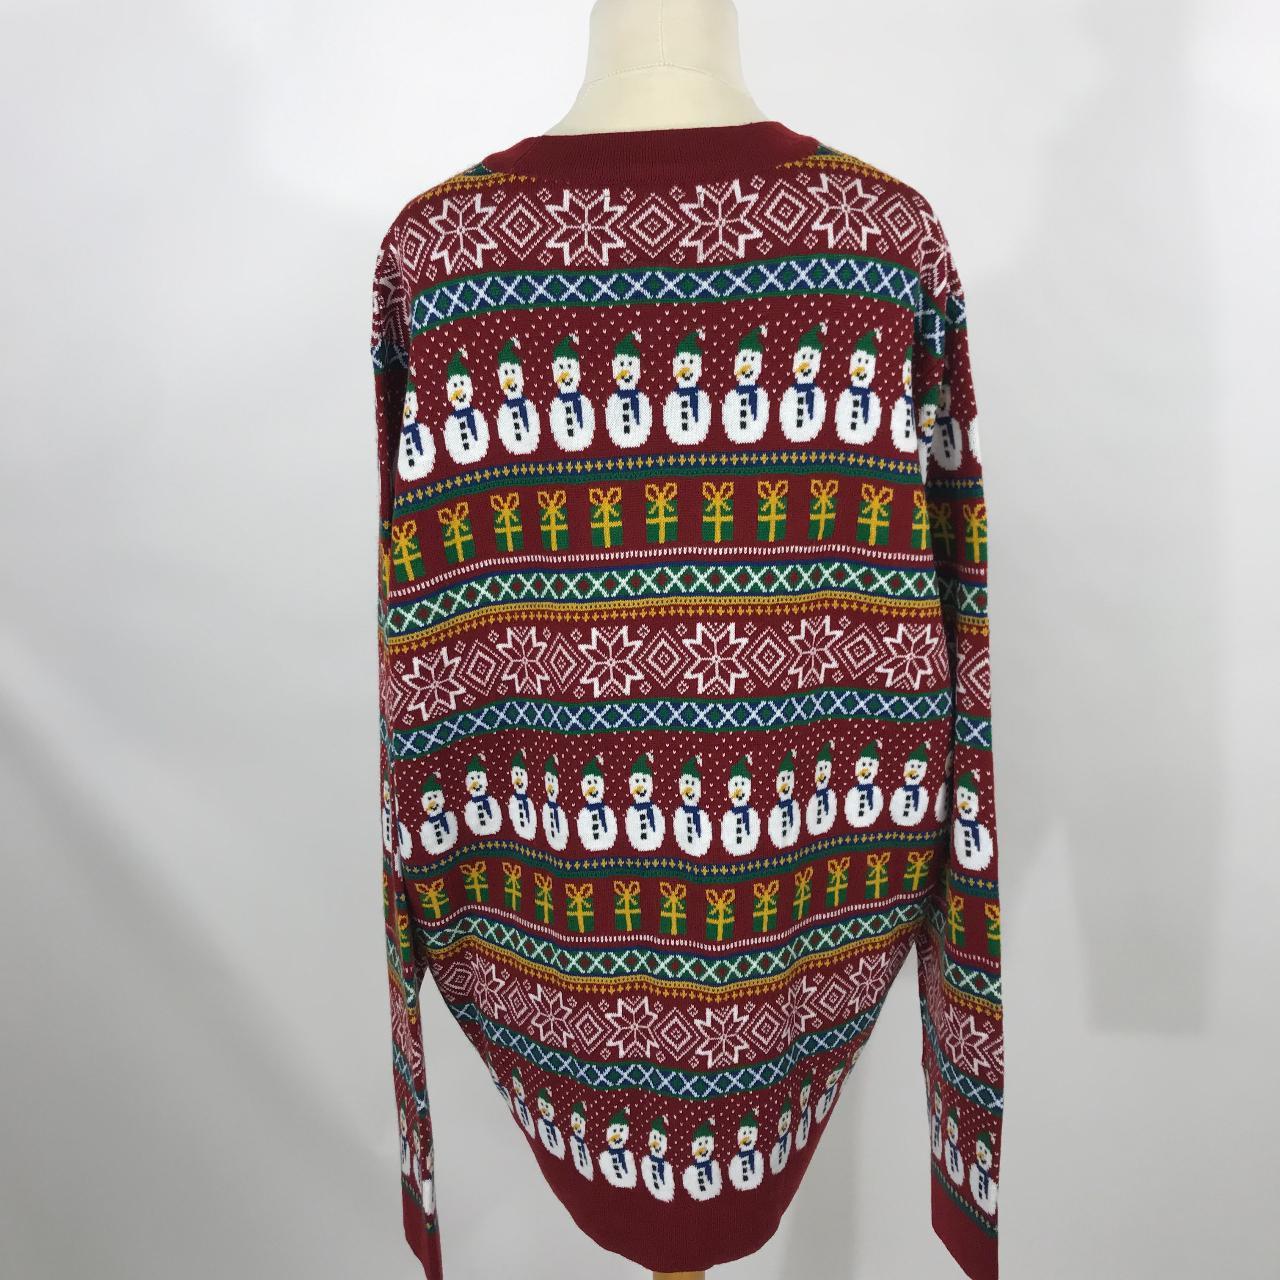 Product Image 2 - Christmas Cardigan 
Size XL
Pit to